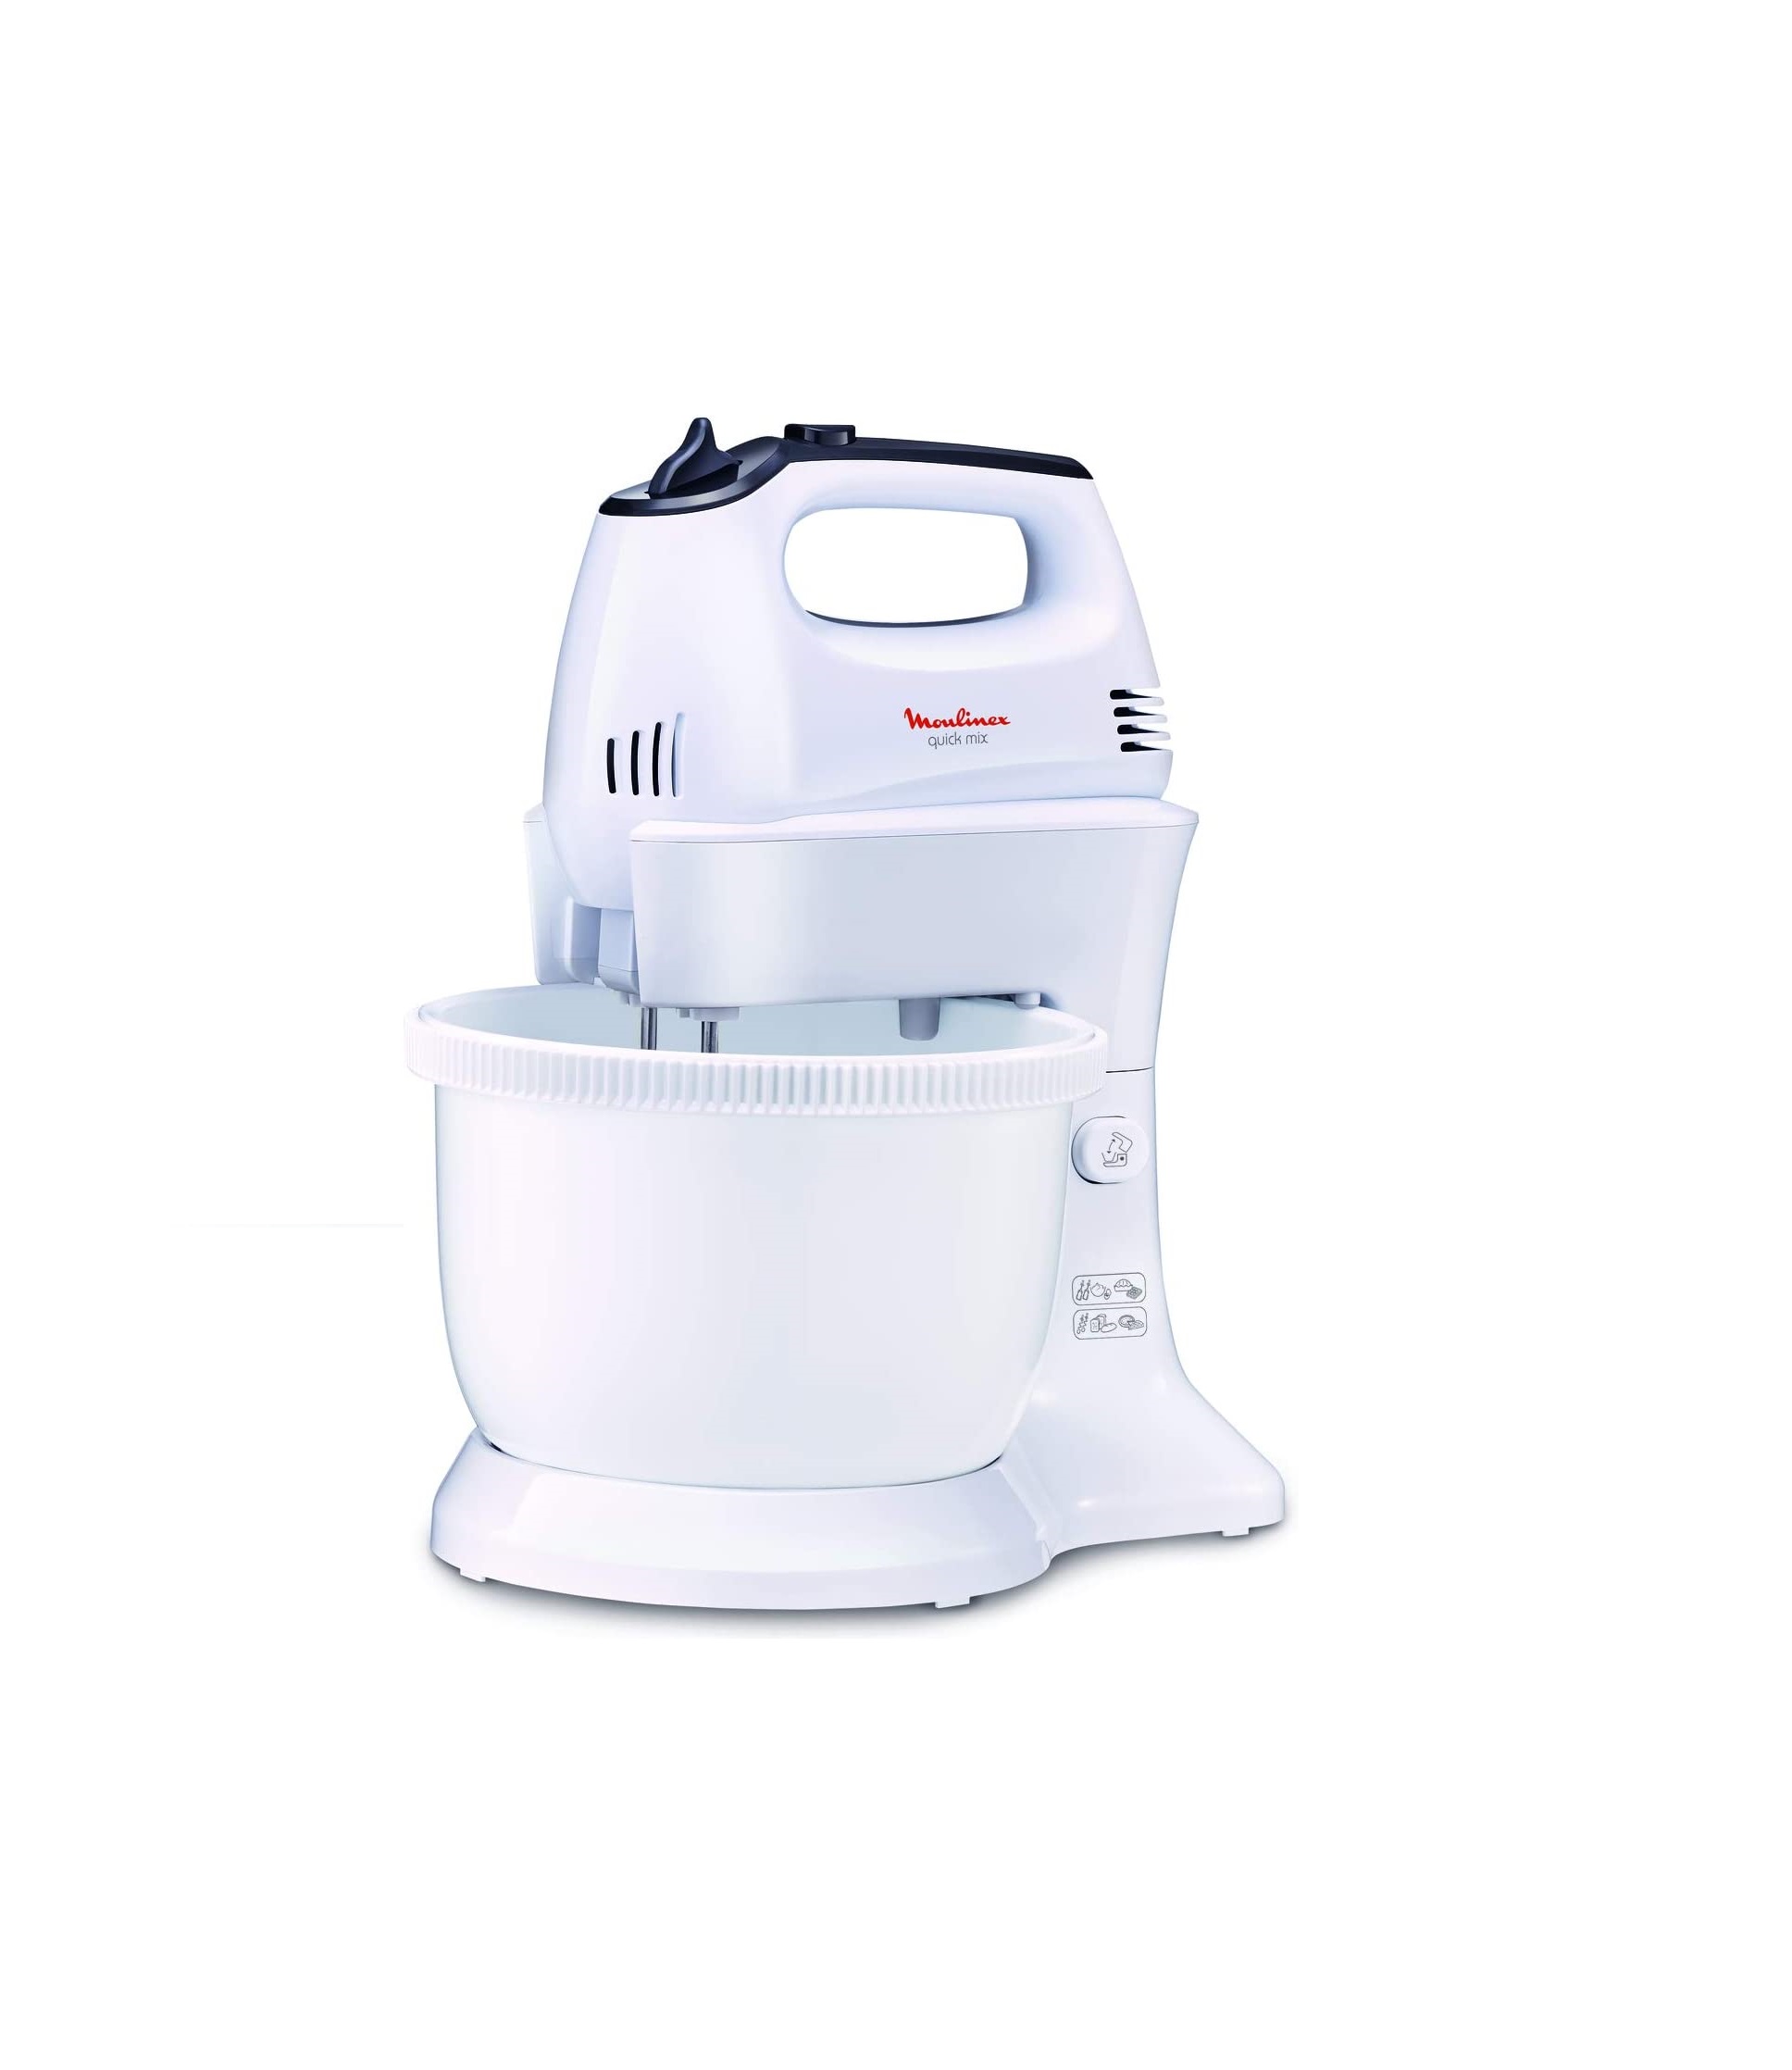 Moulinex Quick Mixer, 300W, 35L, Stainless Steel,, HM311127